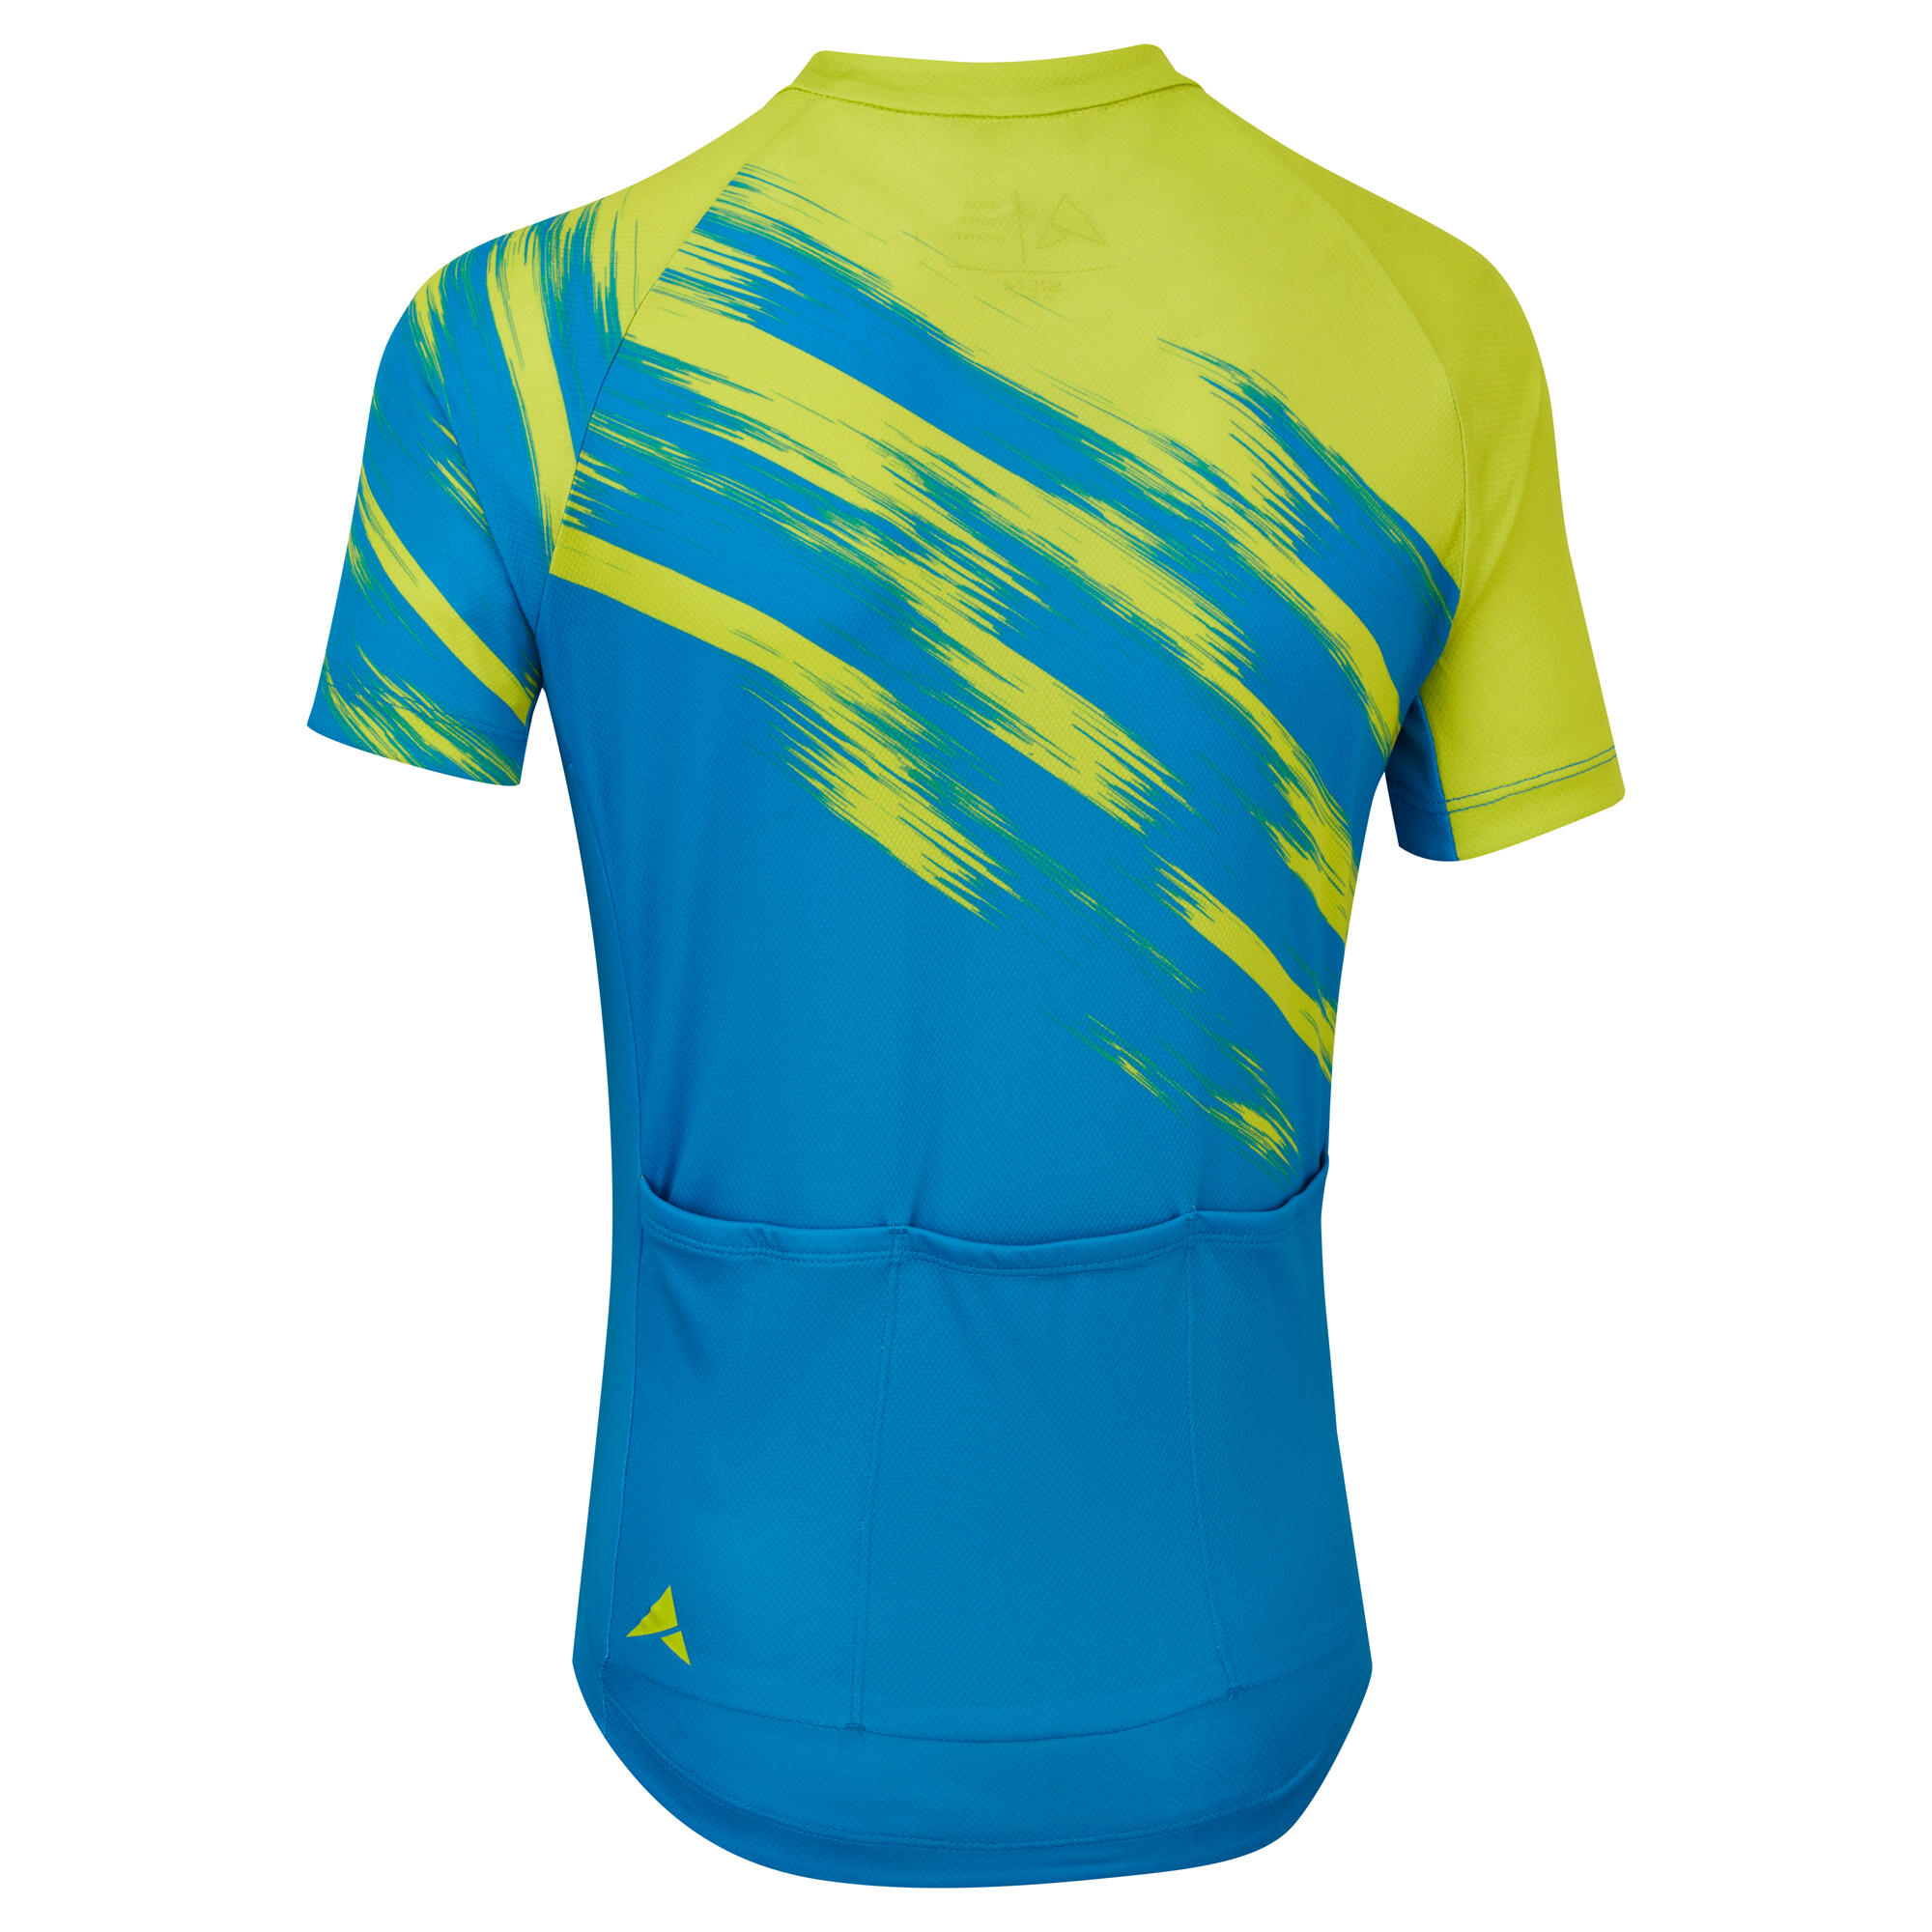 Kid's Airstream Short Sleeve Jersey Road Blue/Lime 9-10 Years Wicking 2/4